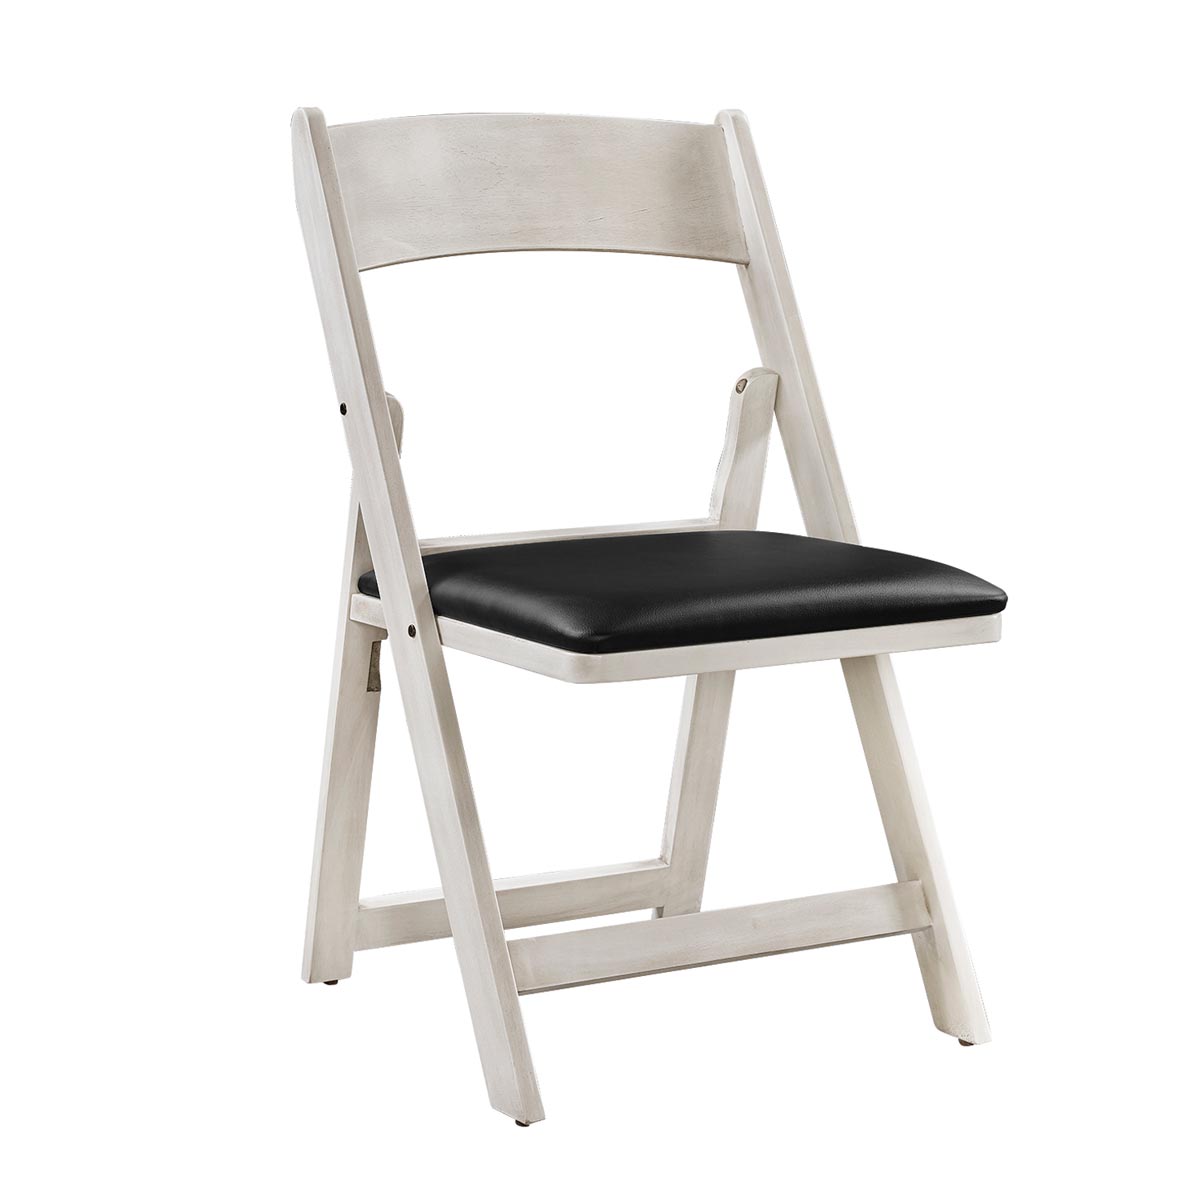 Optional Antique White Folding Chair